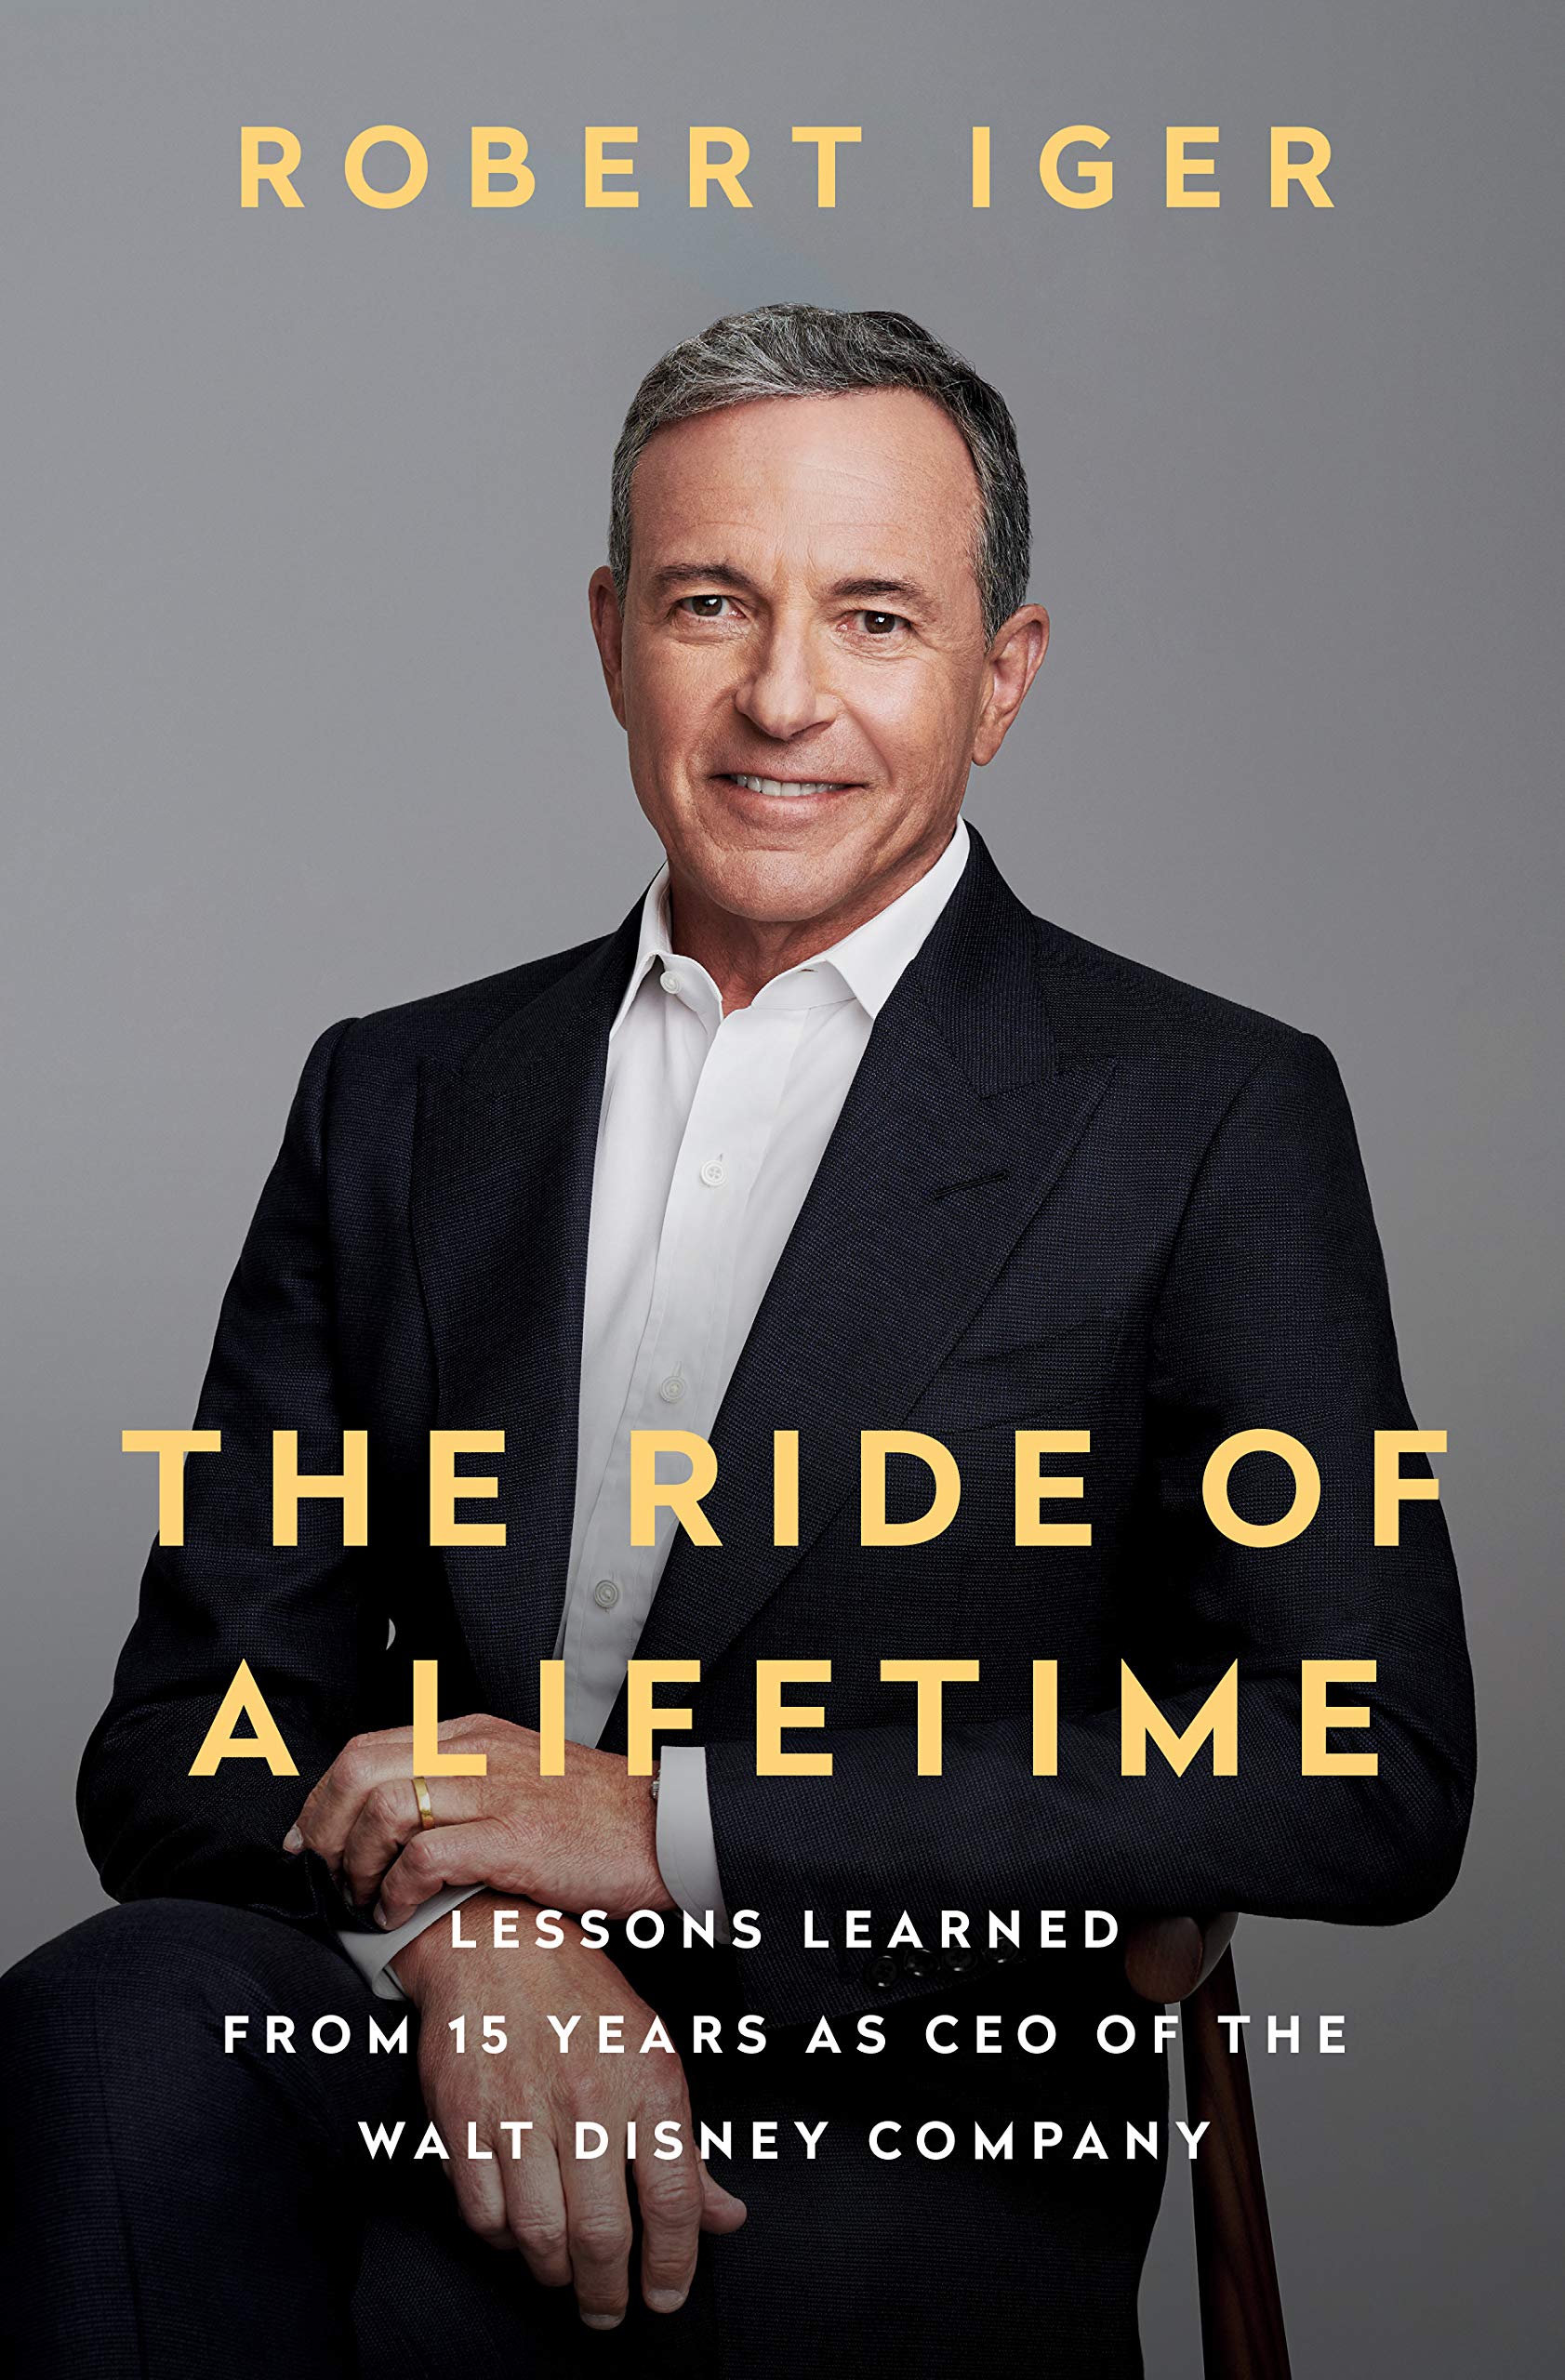 'The Ride Of A Lifetime' by Robert Iger: How To Chart An Incredible Career